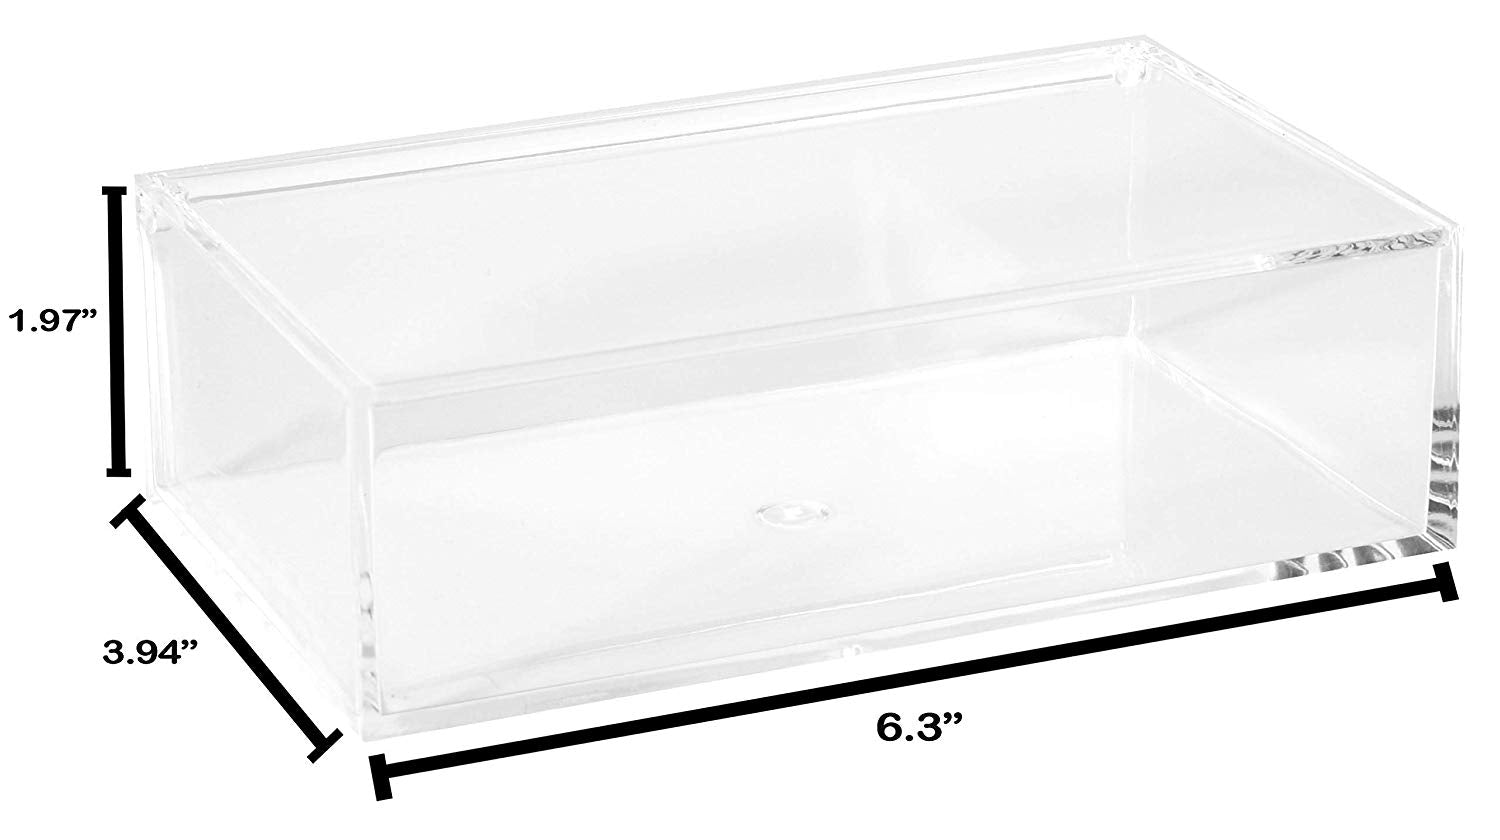 Soft Clear Boxes – Hammont